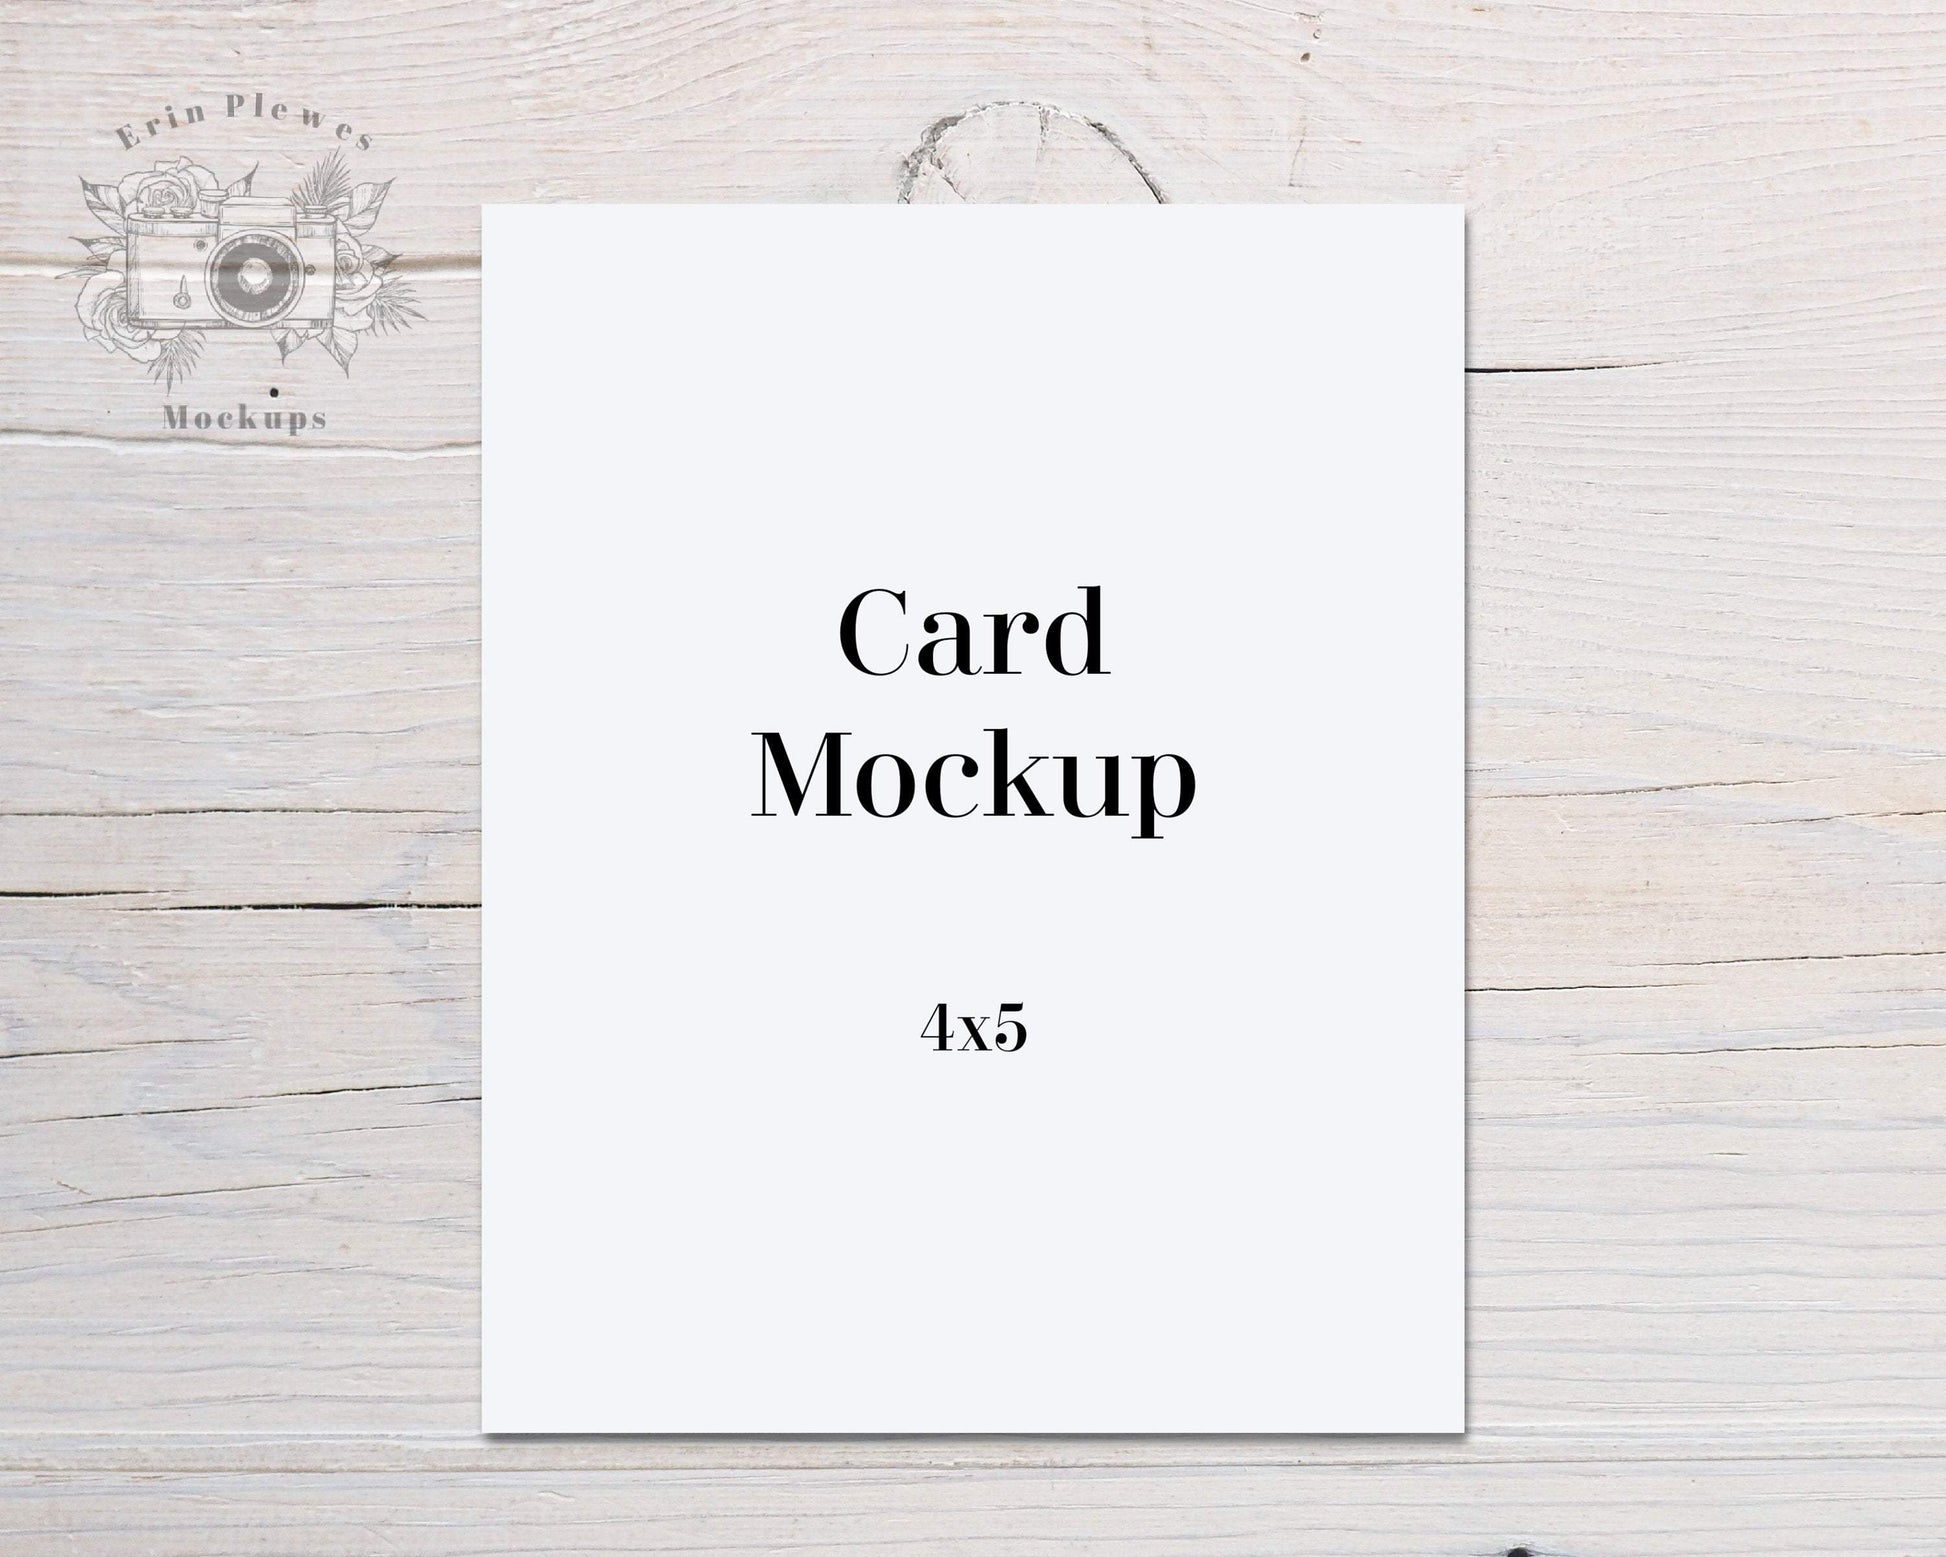 Erin Plewes Mockups Greeting Card Mockup 4x5, Invitation mockup for rustic wedding and birthday party invite, Jpeg Instant Digital Download Photo